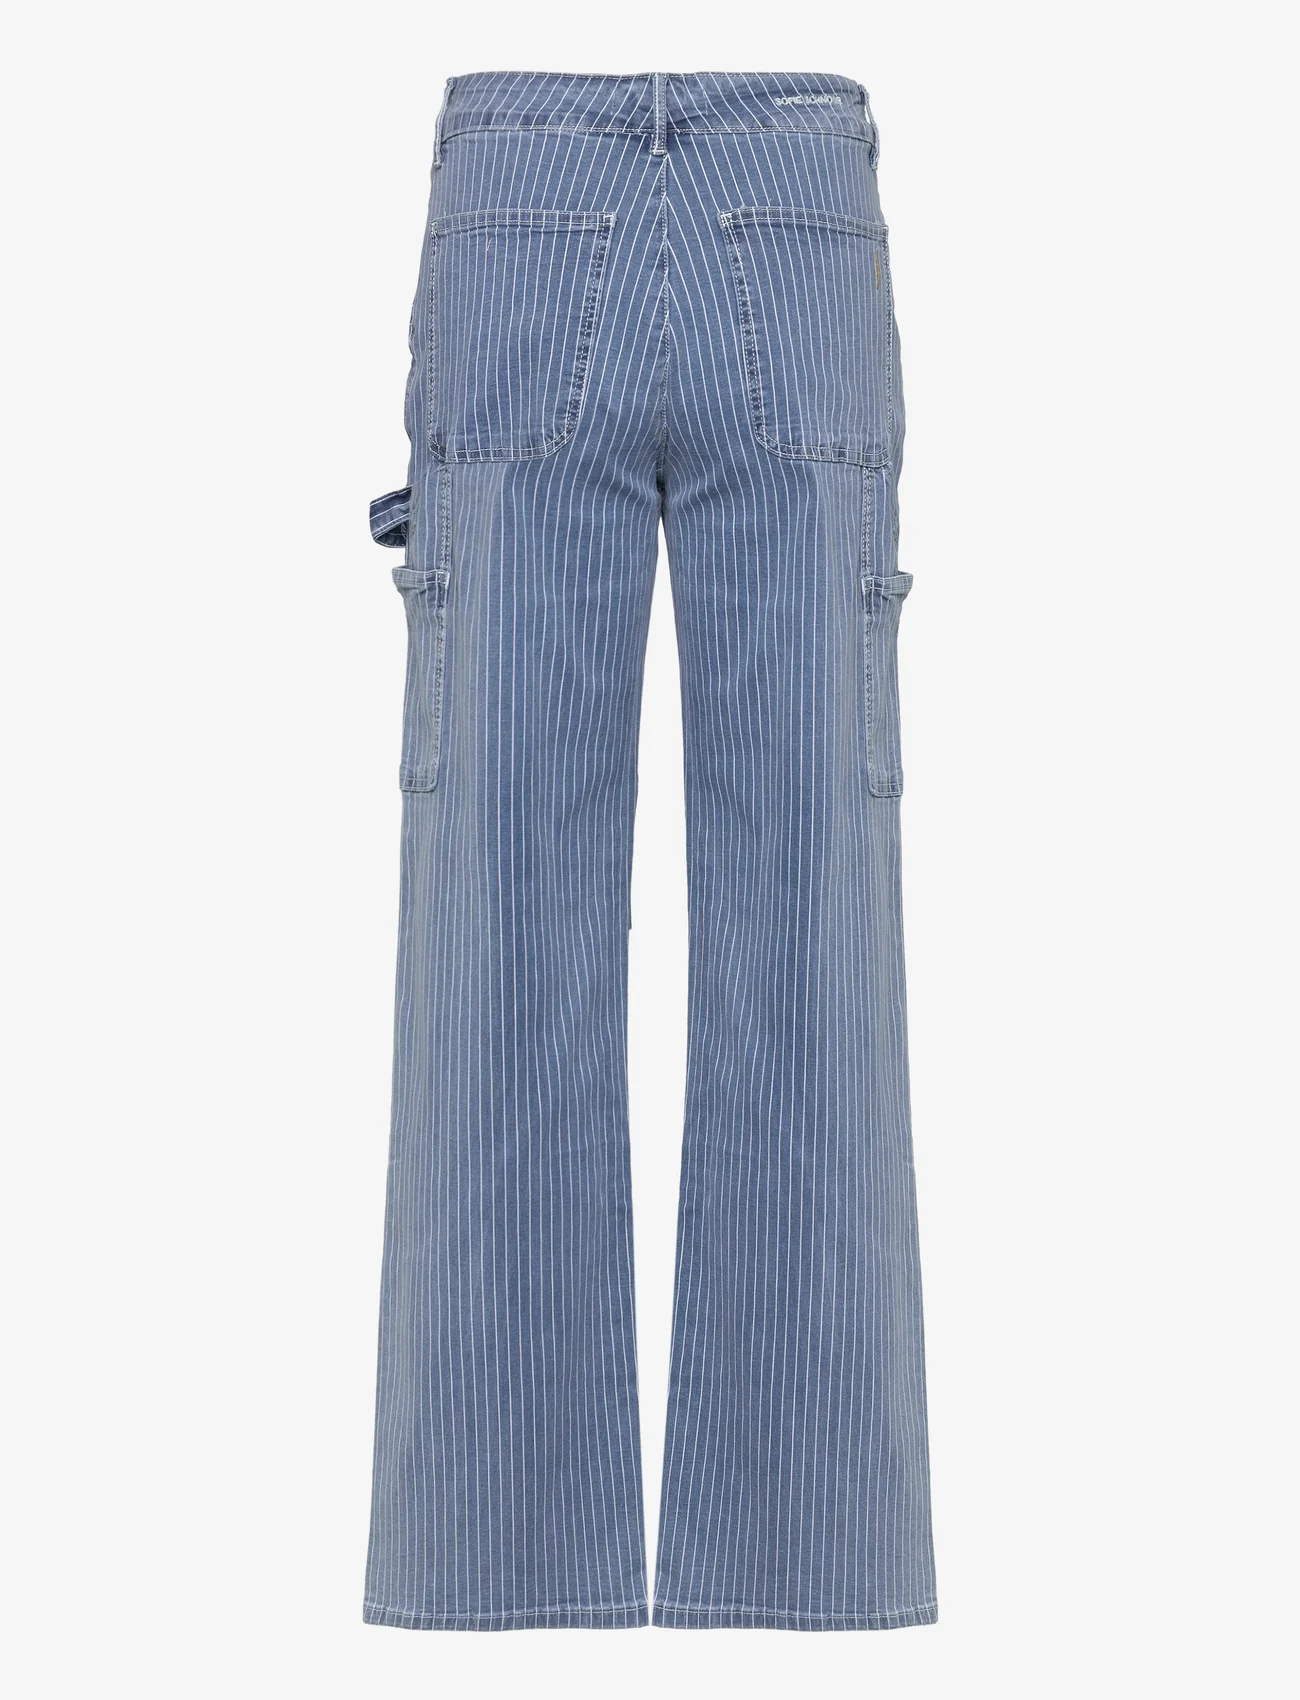 Sofie Schnoor - Trousers - cargo pants - light blue striped - 1